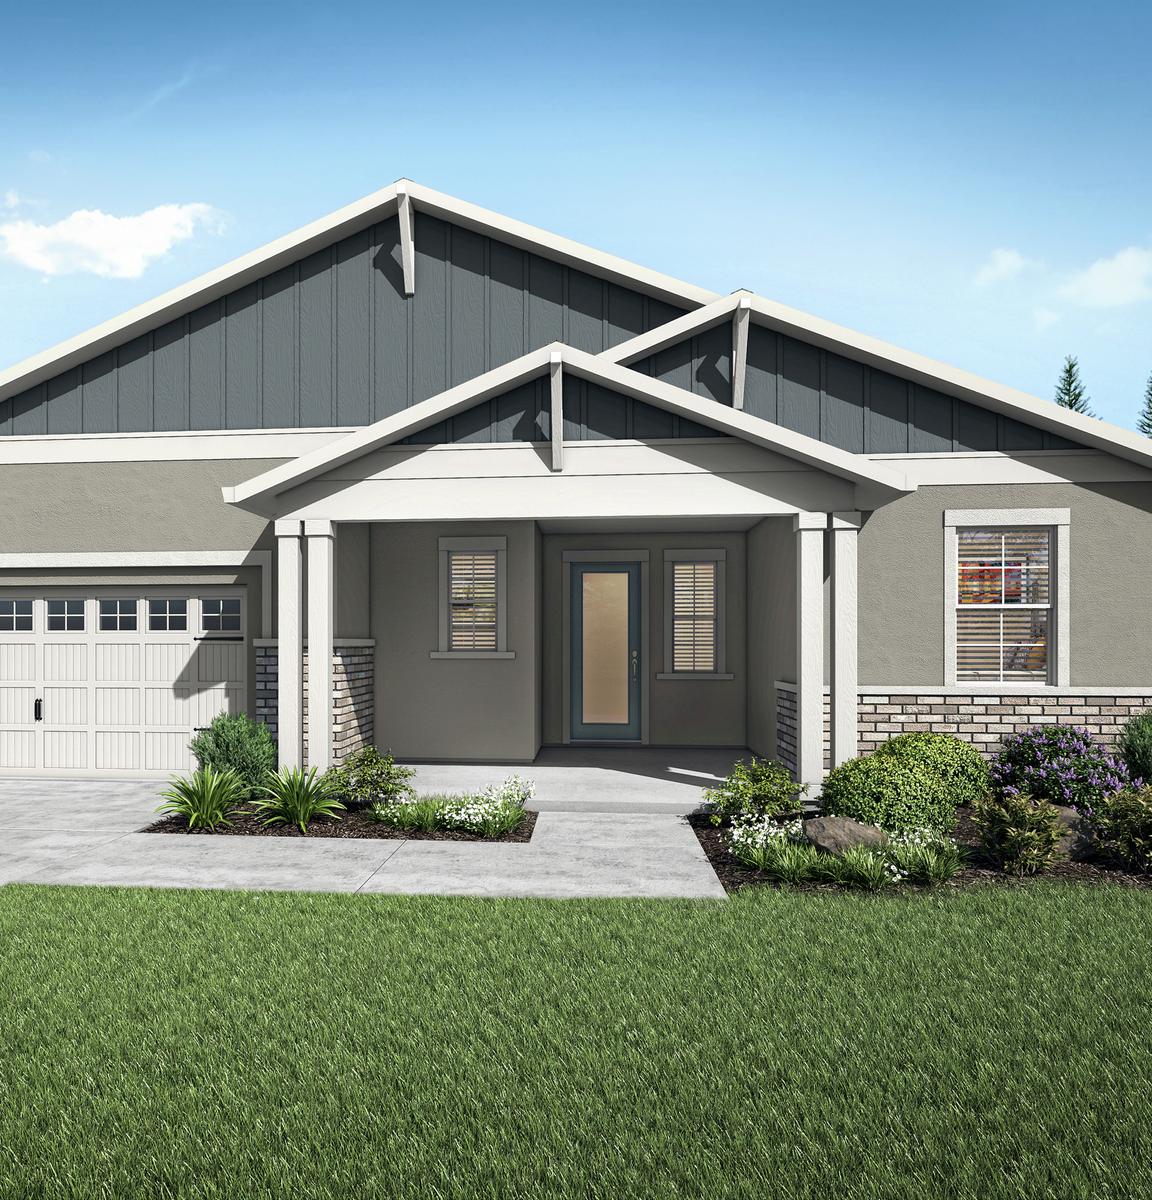 The Marshall plan is a single-story home with gray stucco and blue siding accents.